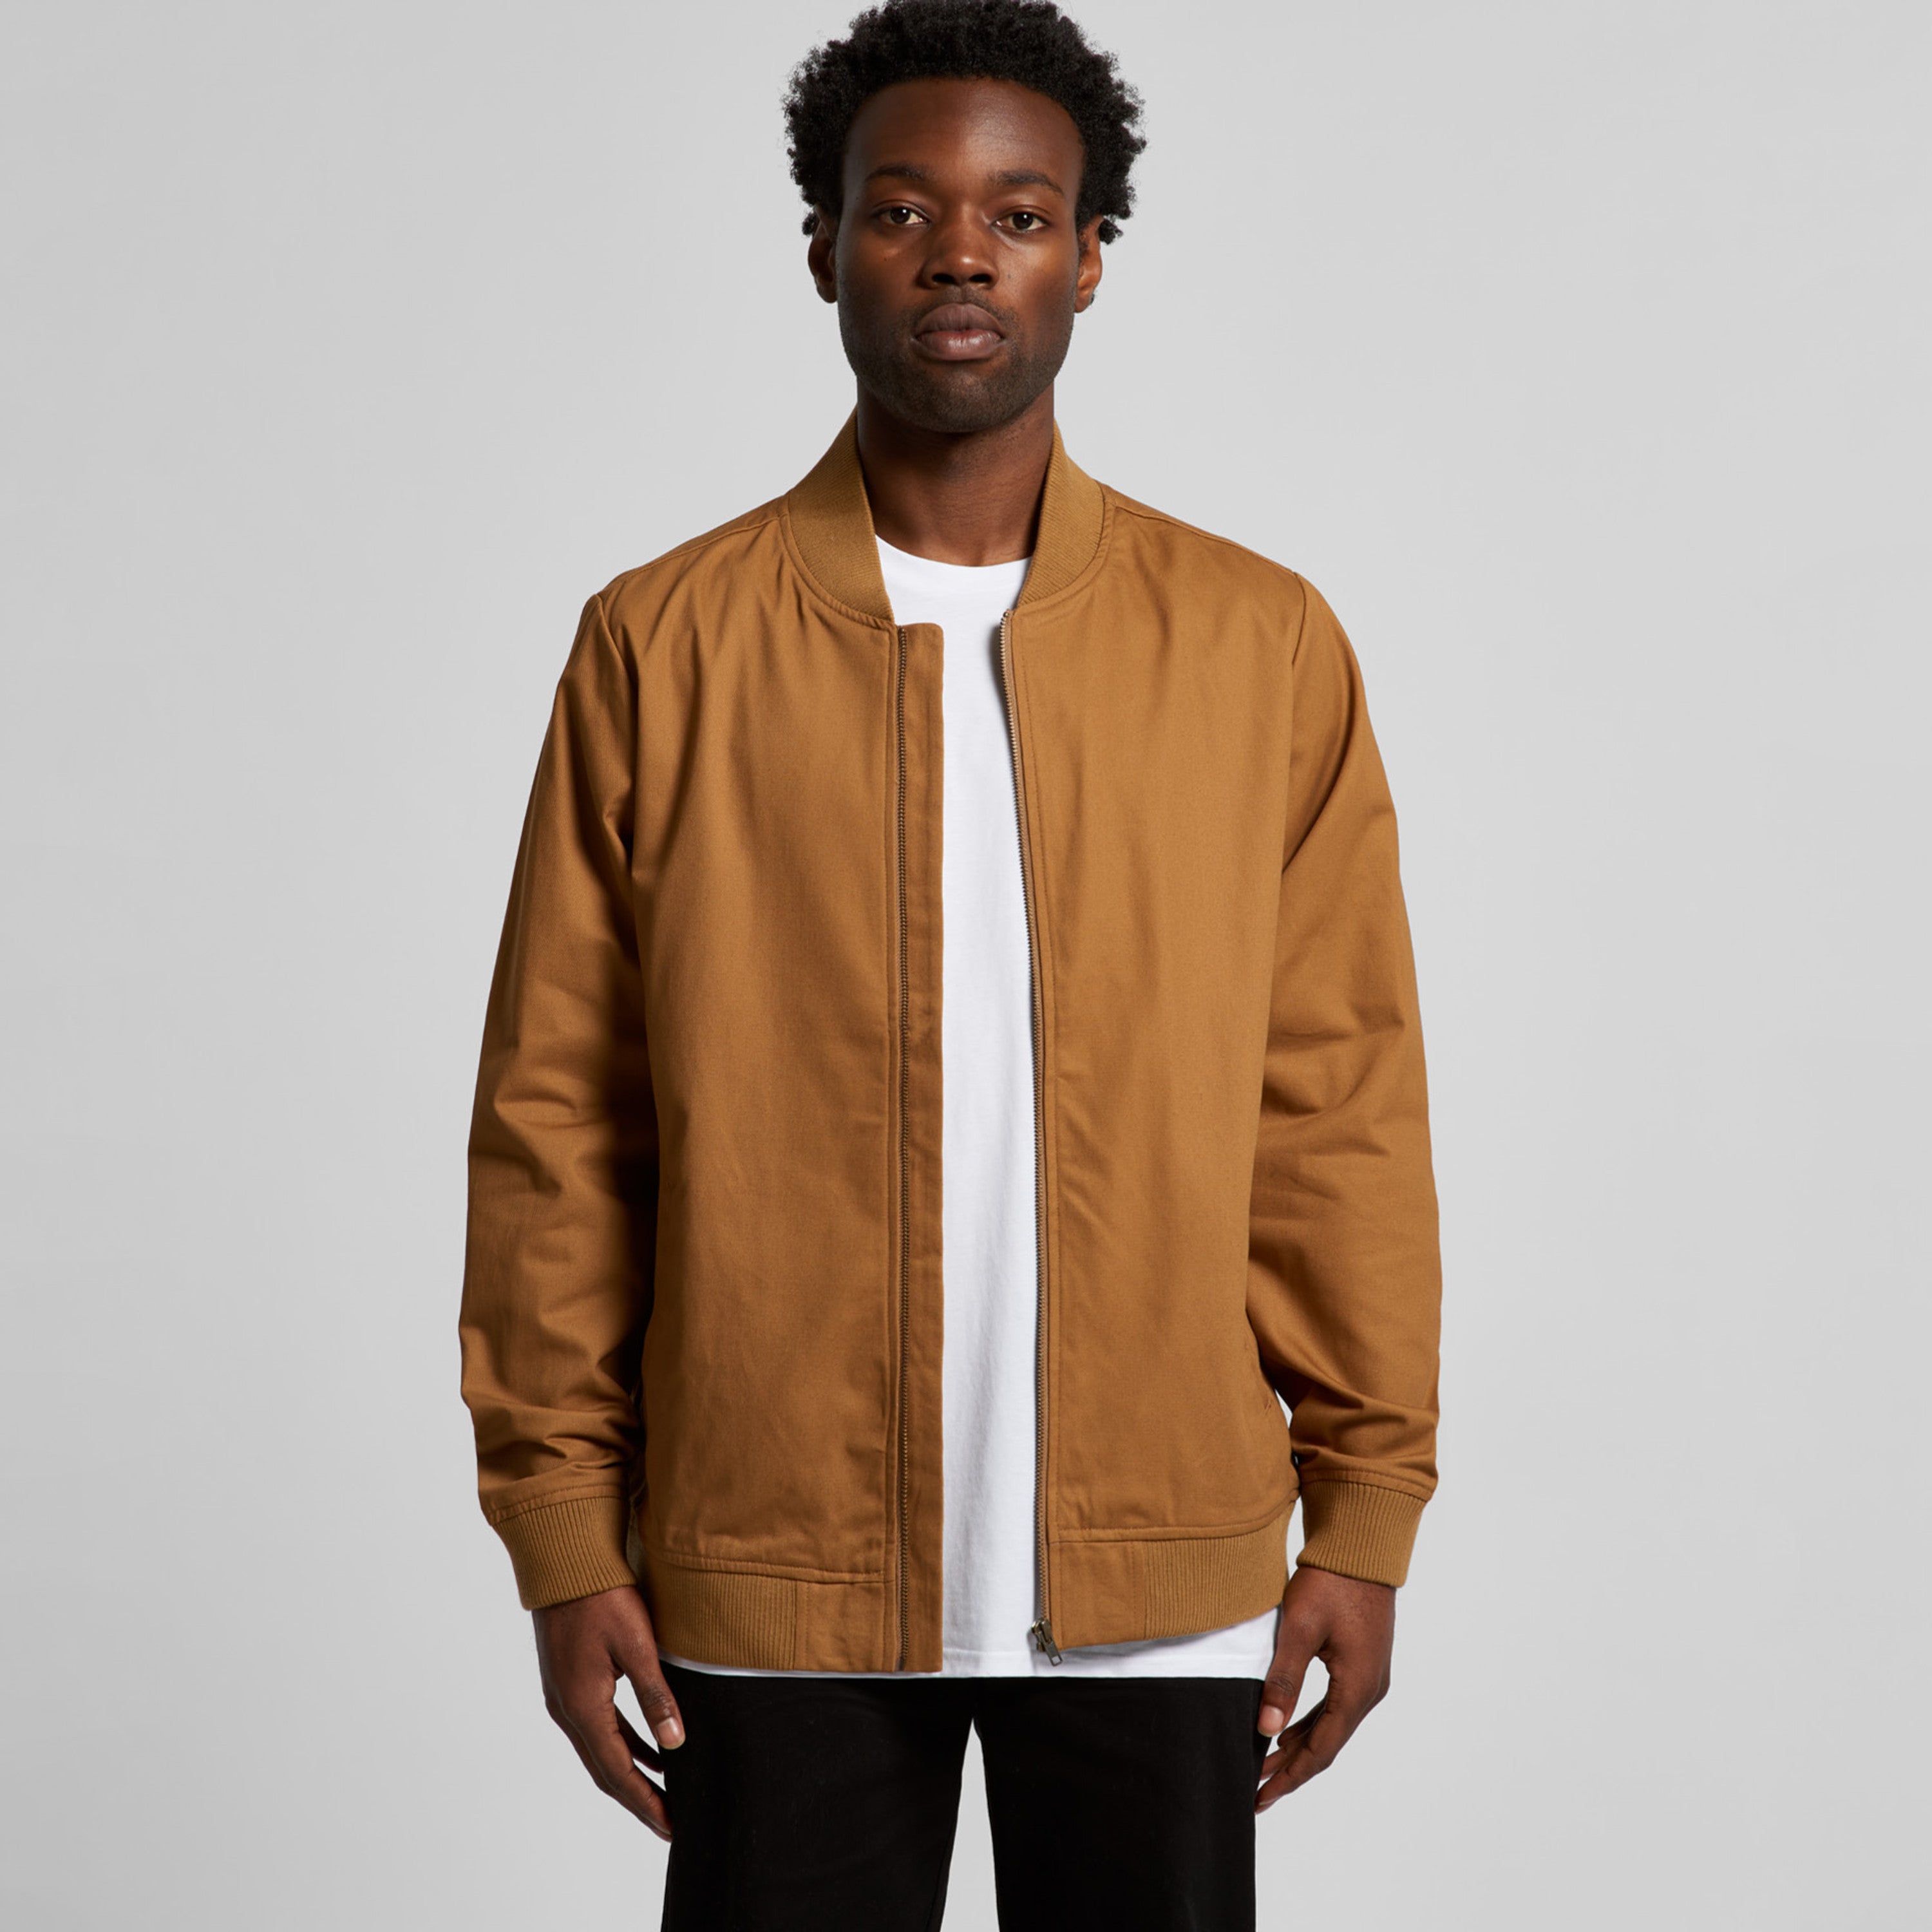 INTO THE AM Bomber Jacket - Lightweight Slim Fit Windbreaker Jacket with  Pockets for Men (Brown, Small) at Amazon Men's Clothing store